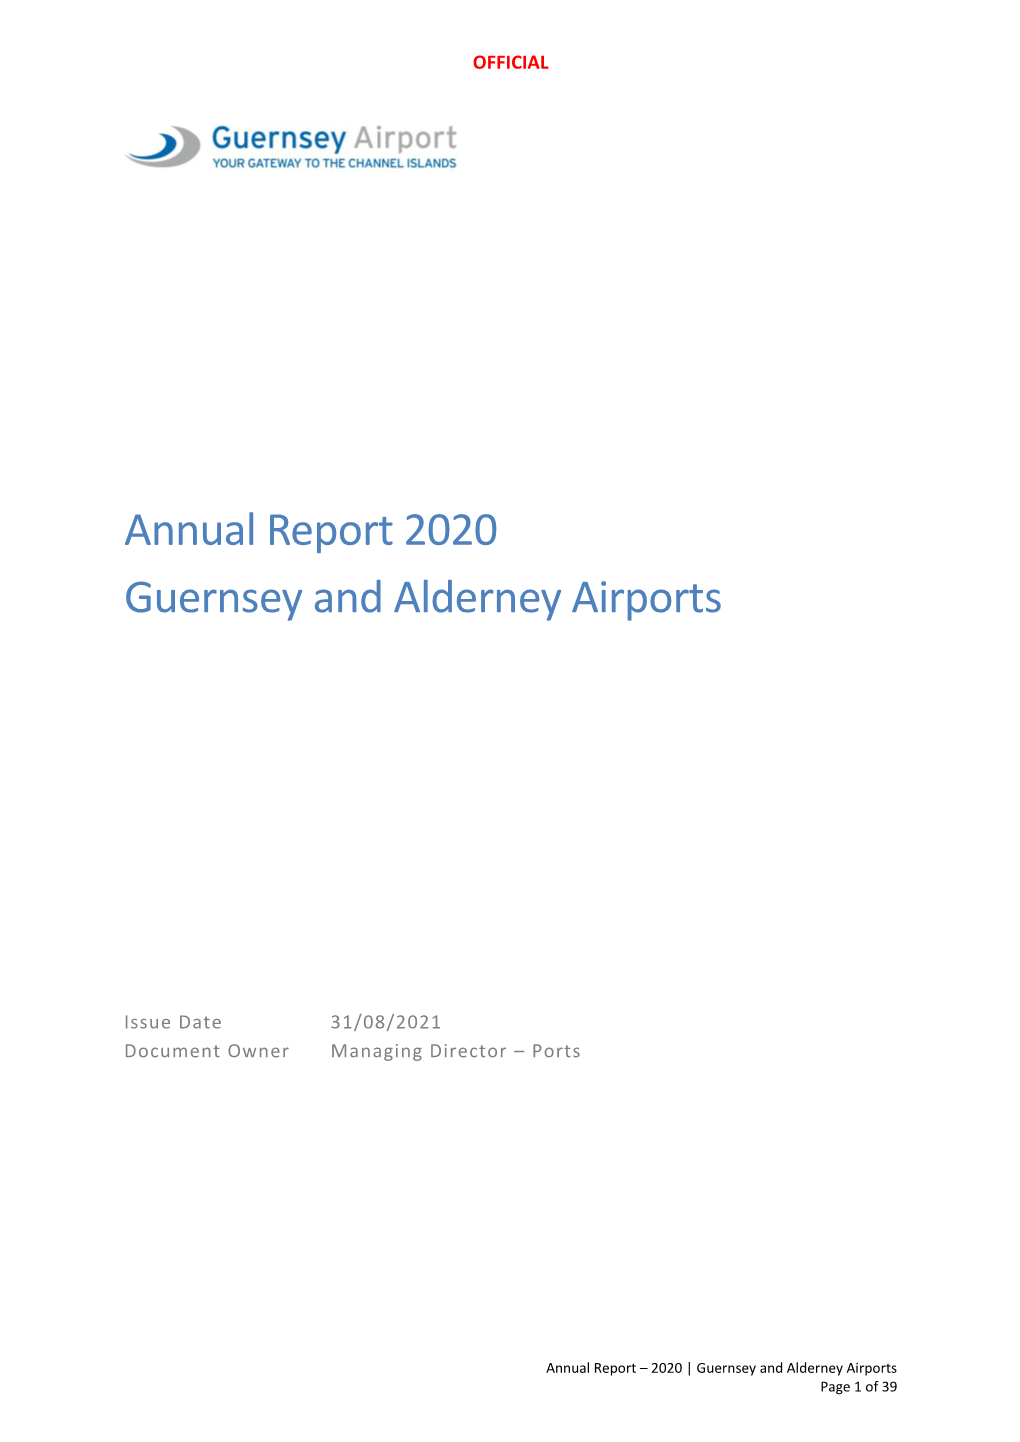 Annual Report 2020 Guernsey and Alderney Airports